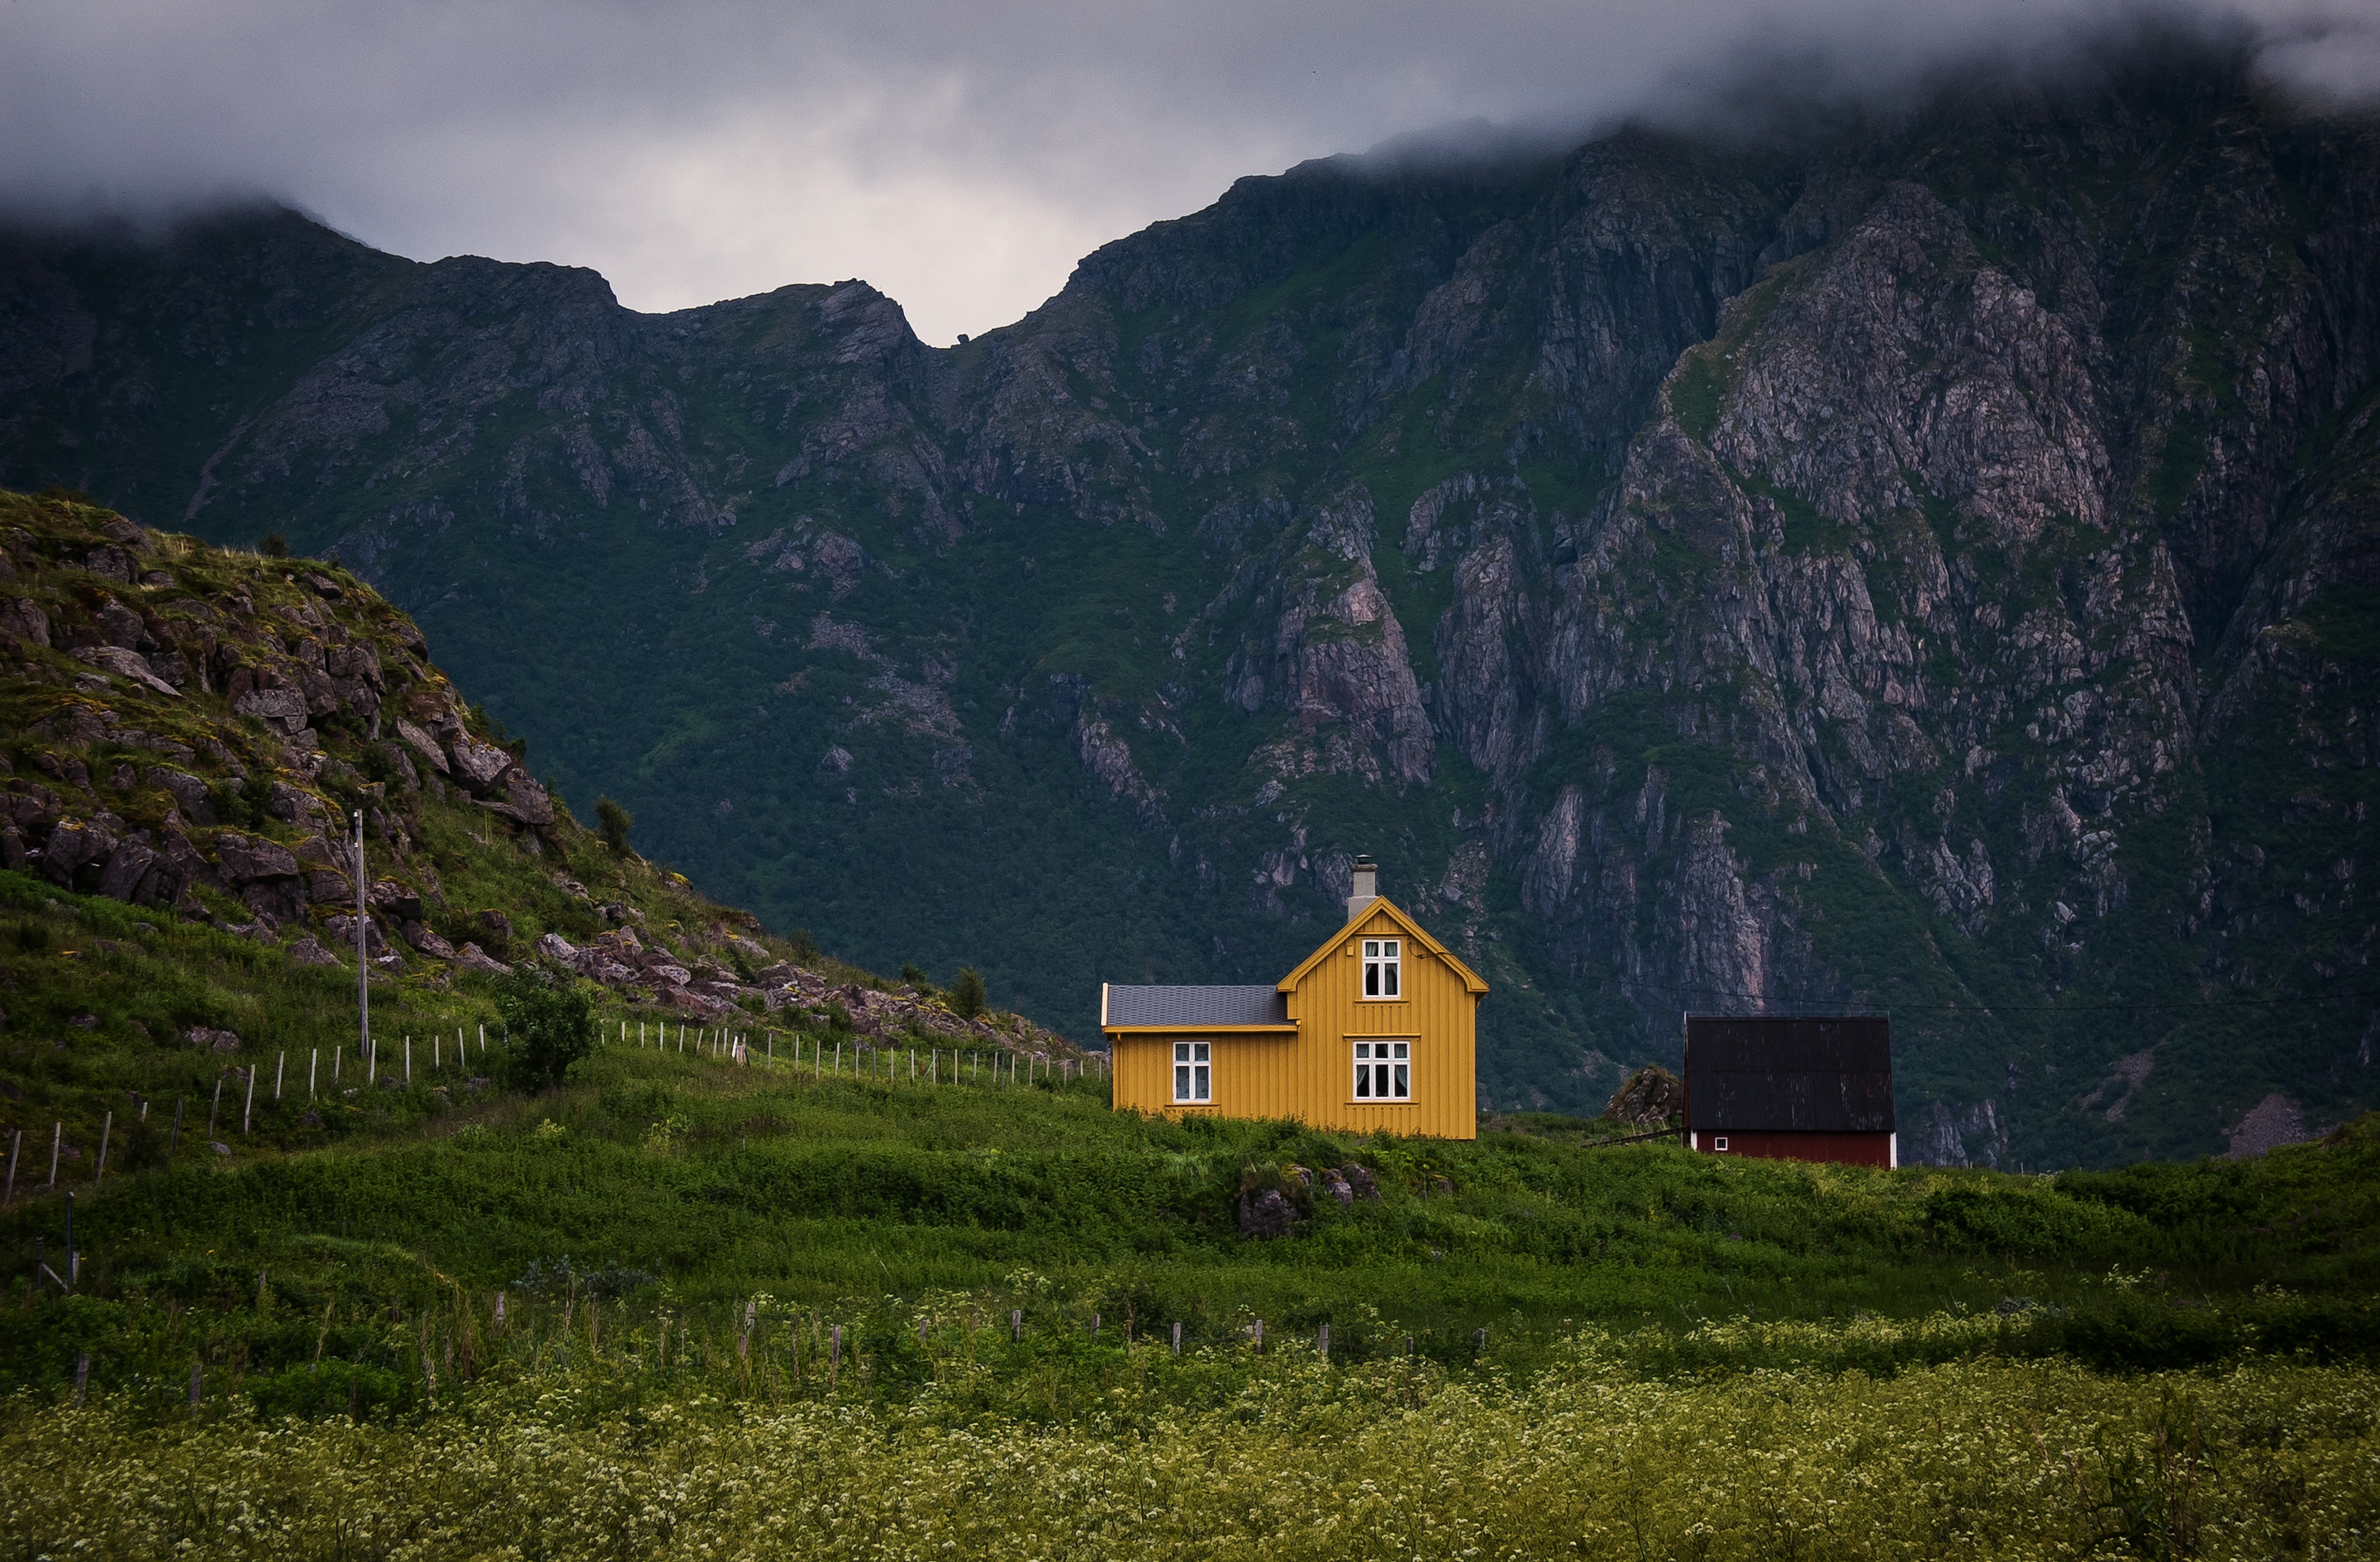 small house, seclusion, privacy, nature, grass, mountains, clouds, lodge